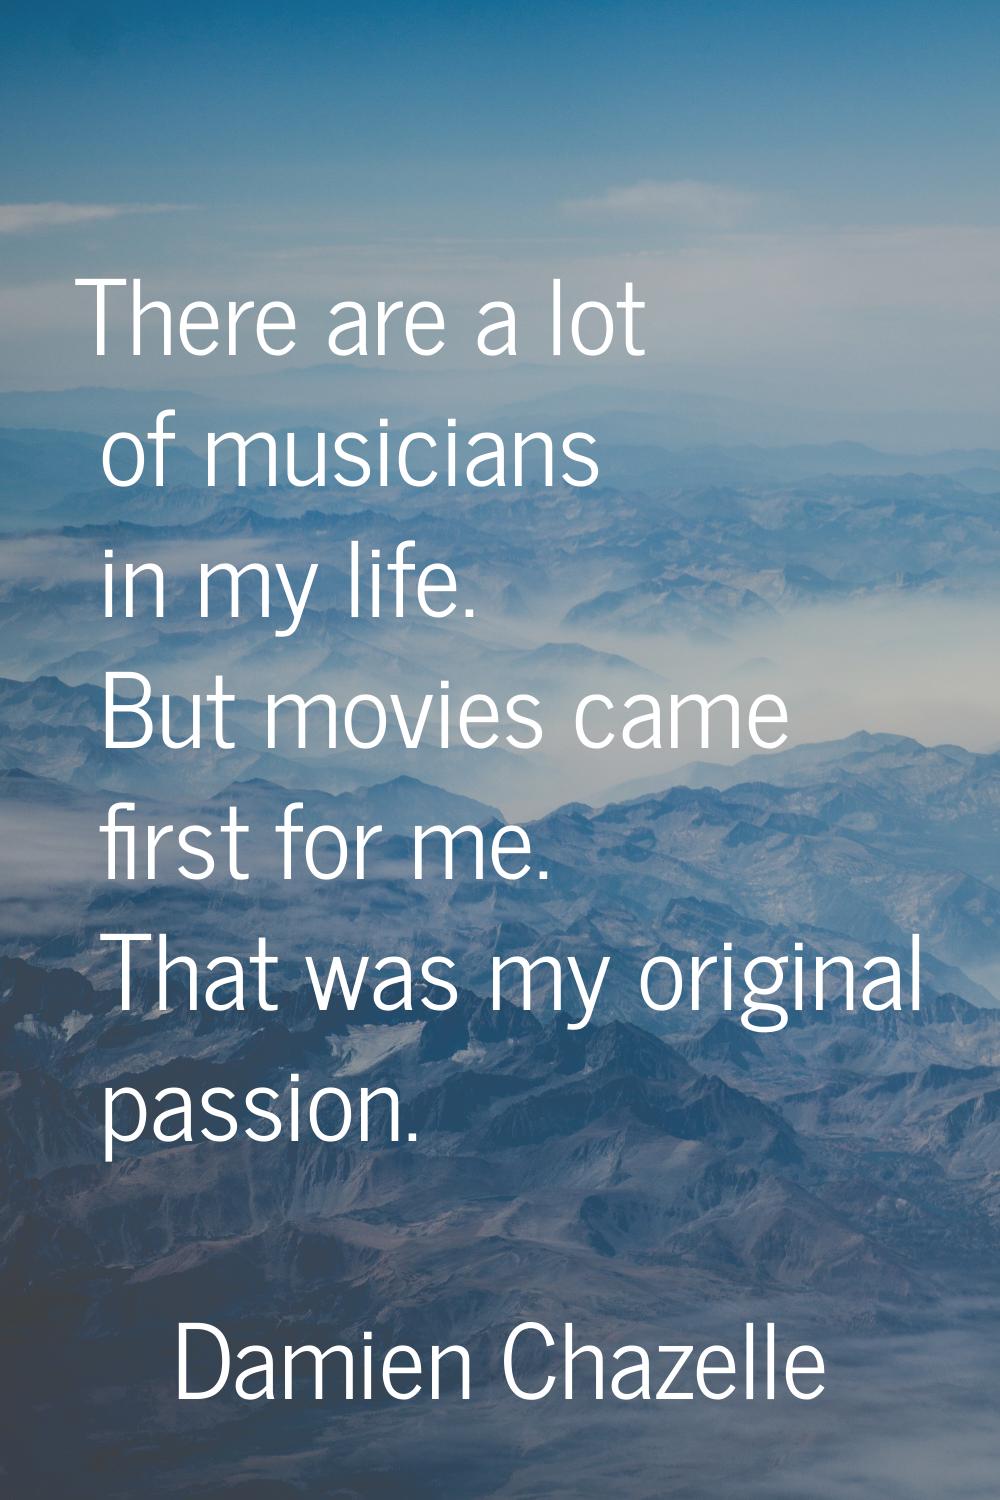 There are a lot of musicians in my life. But movies came first for me. That was my original passion